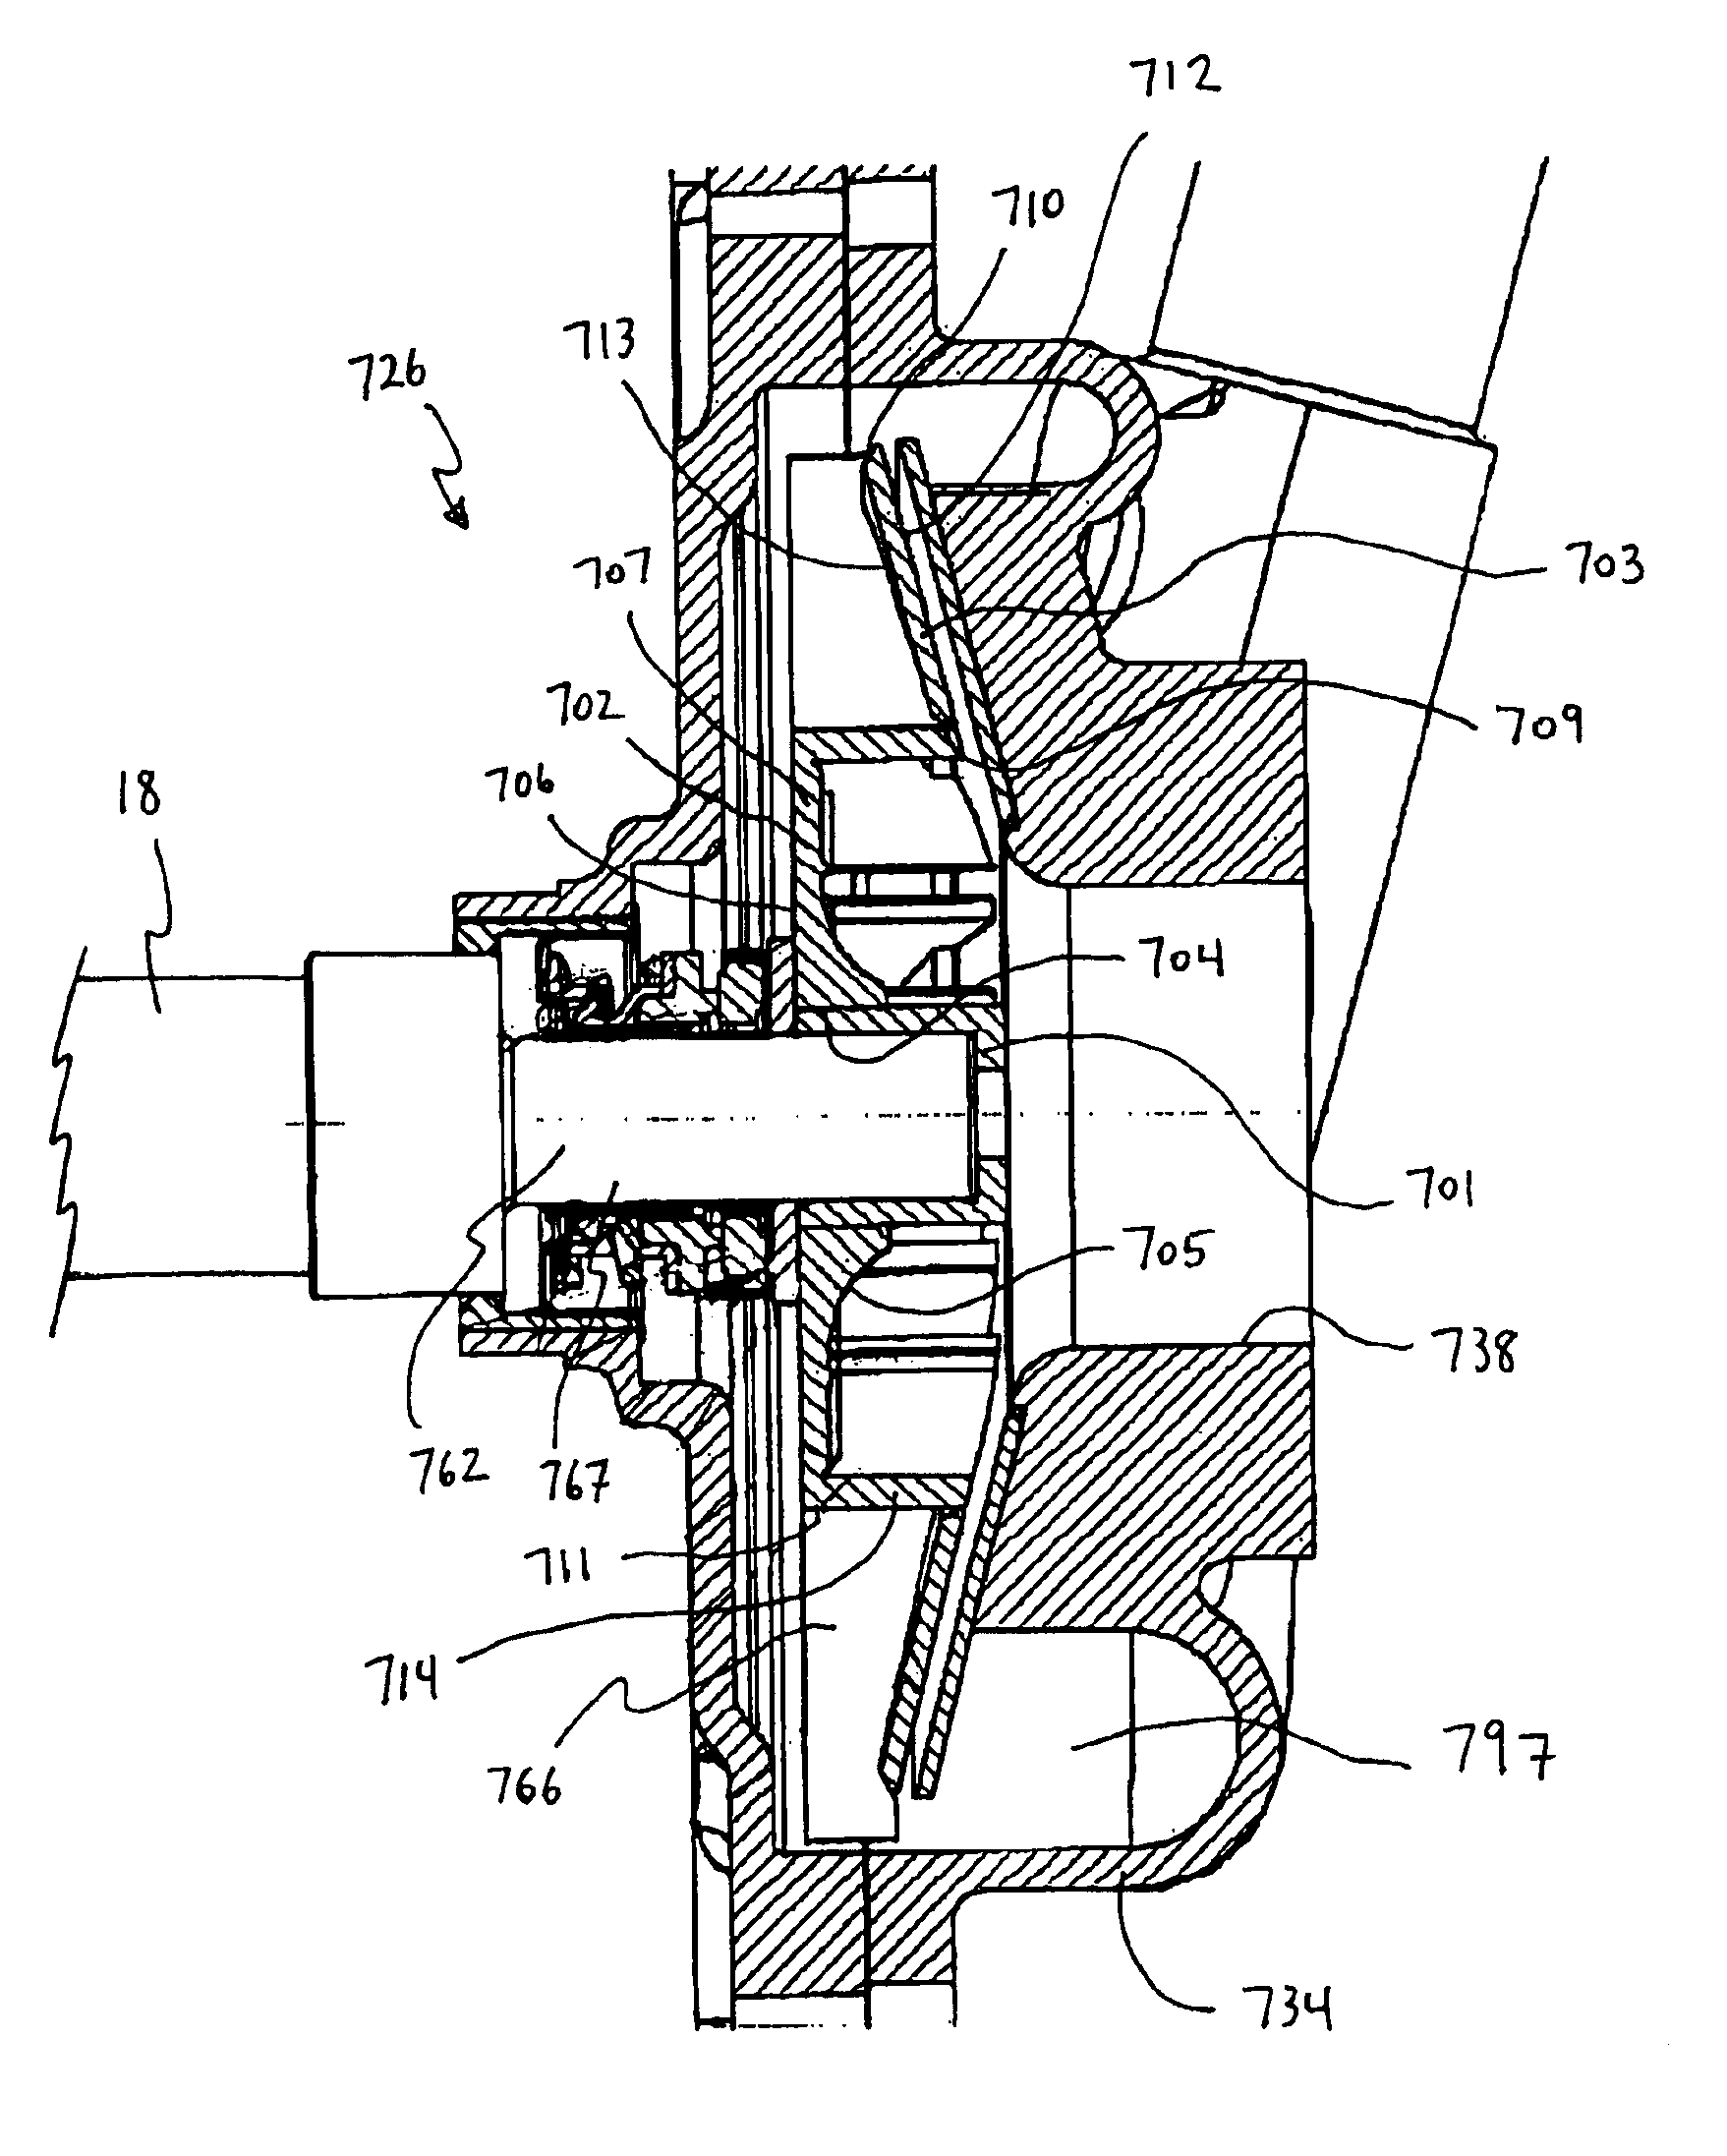 Internal combustion engine combination with direct camshaft driven coolant pump